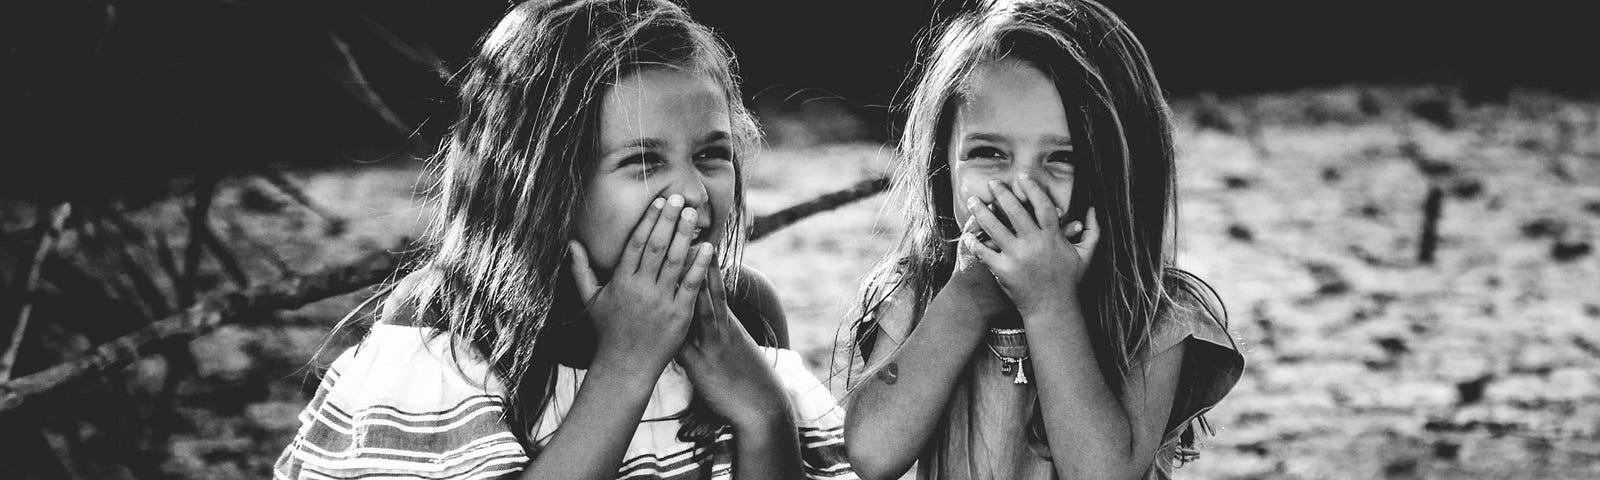 A black and white photo of two girls laughing next to each other.